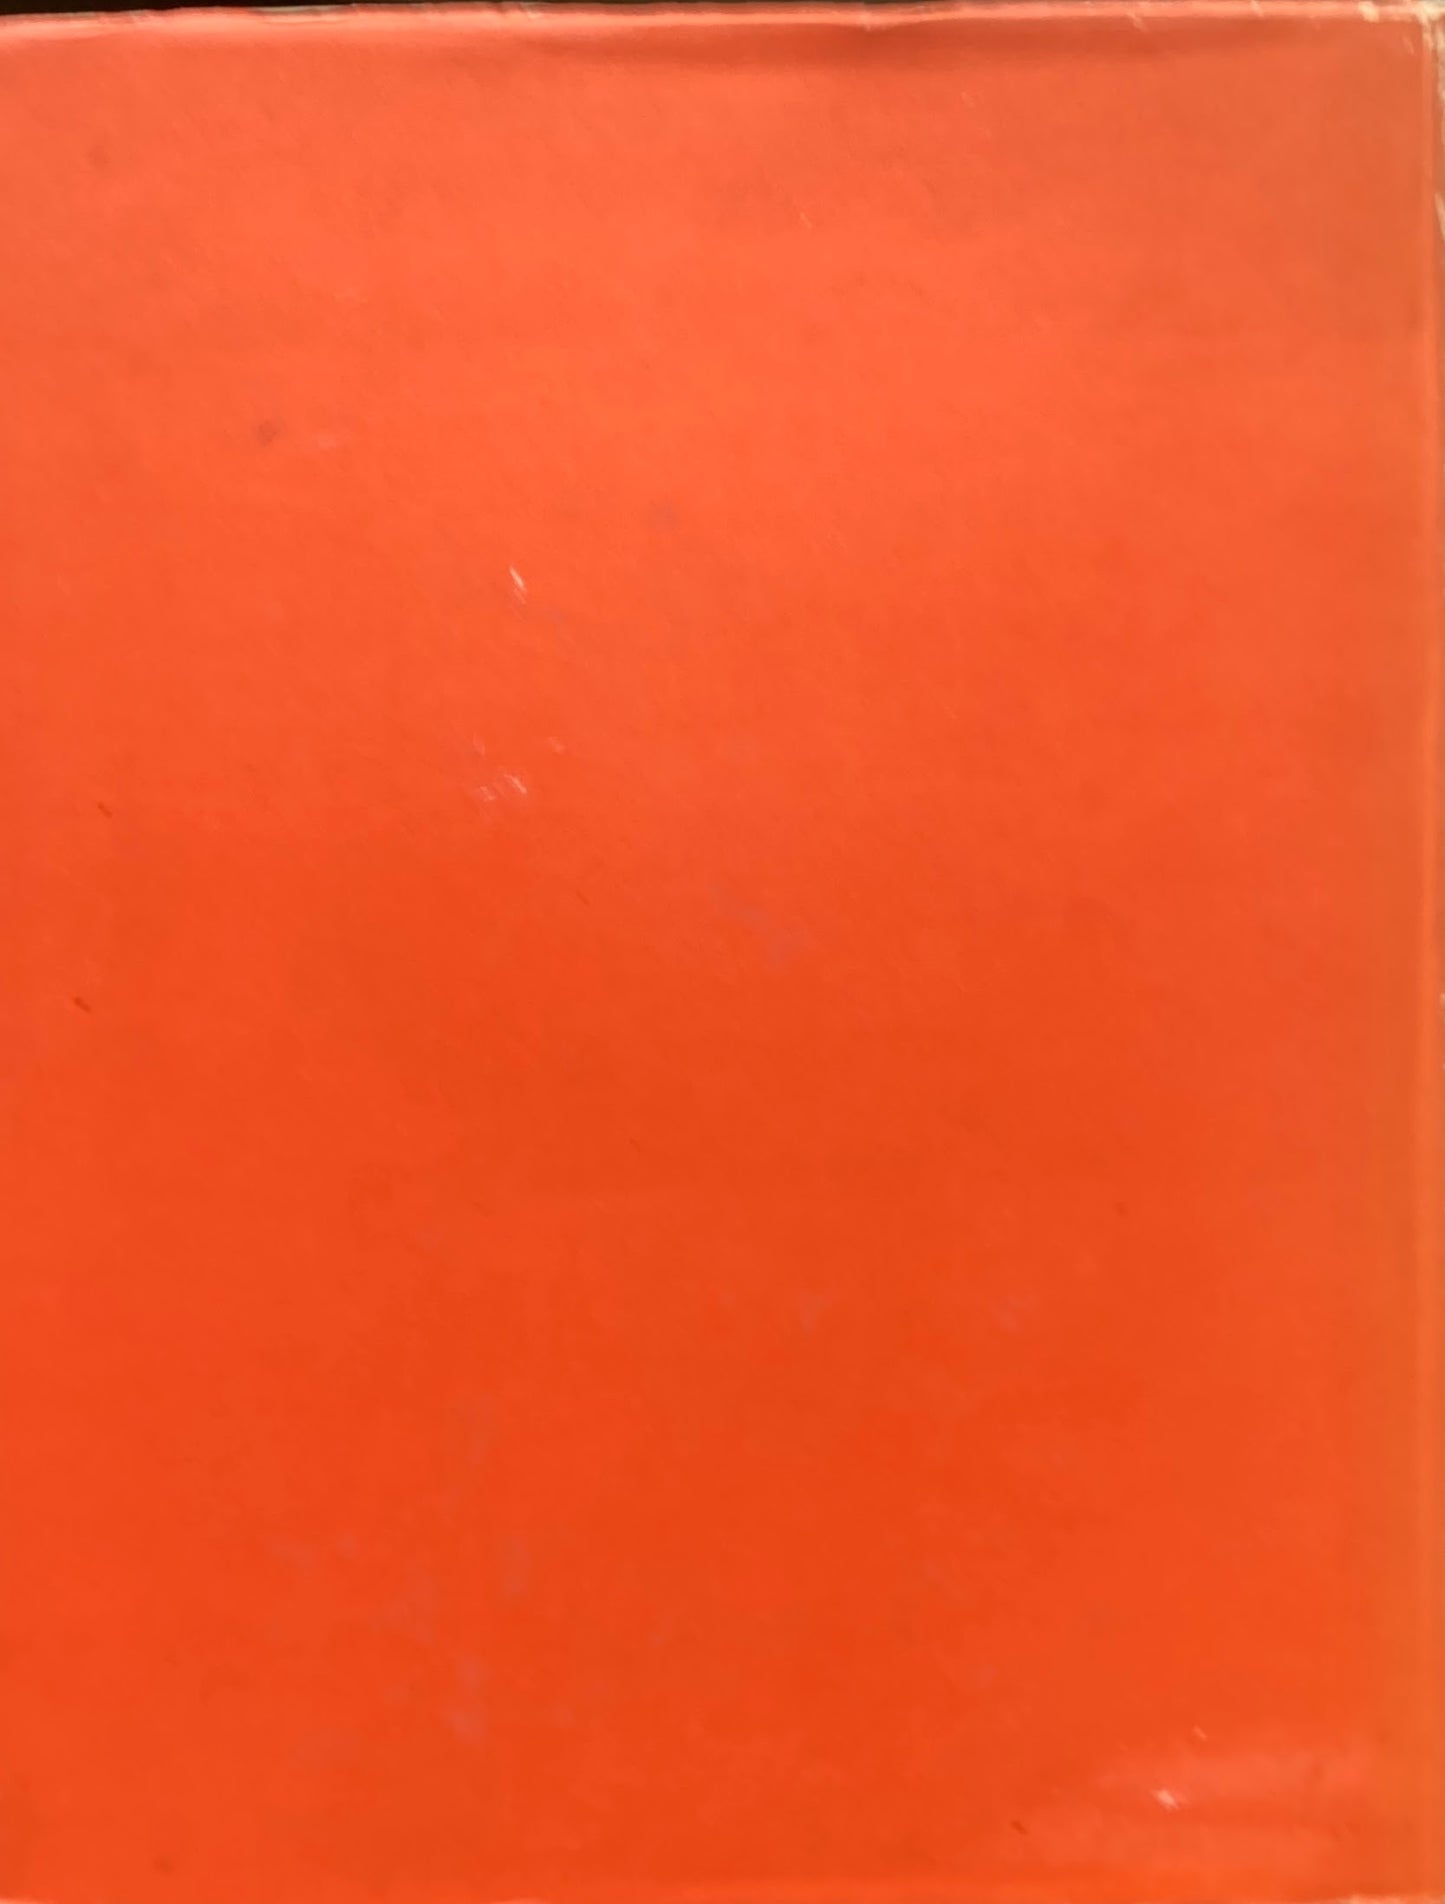 Donald Judd　A catalogue of the exhibition at the National Gallery of Canada, Ottawa, 1975  catalogue raisonne of paintings, objects, and wood blocks, 1960-1974　ドナルド・ジャッド